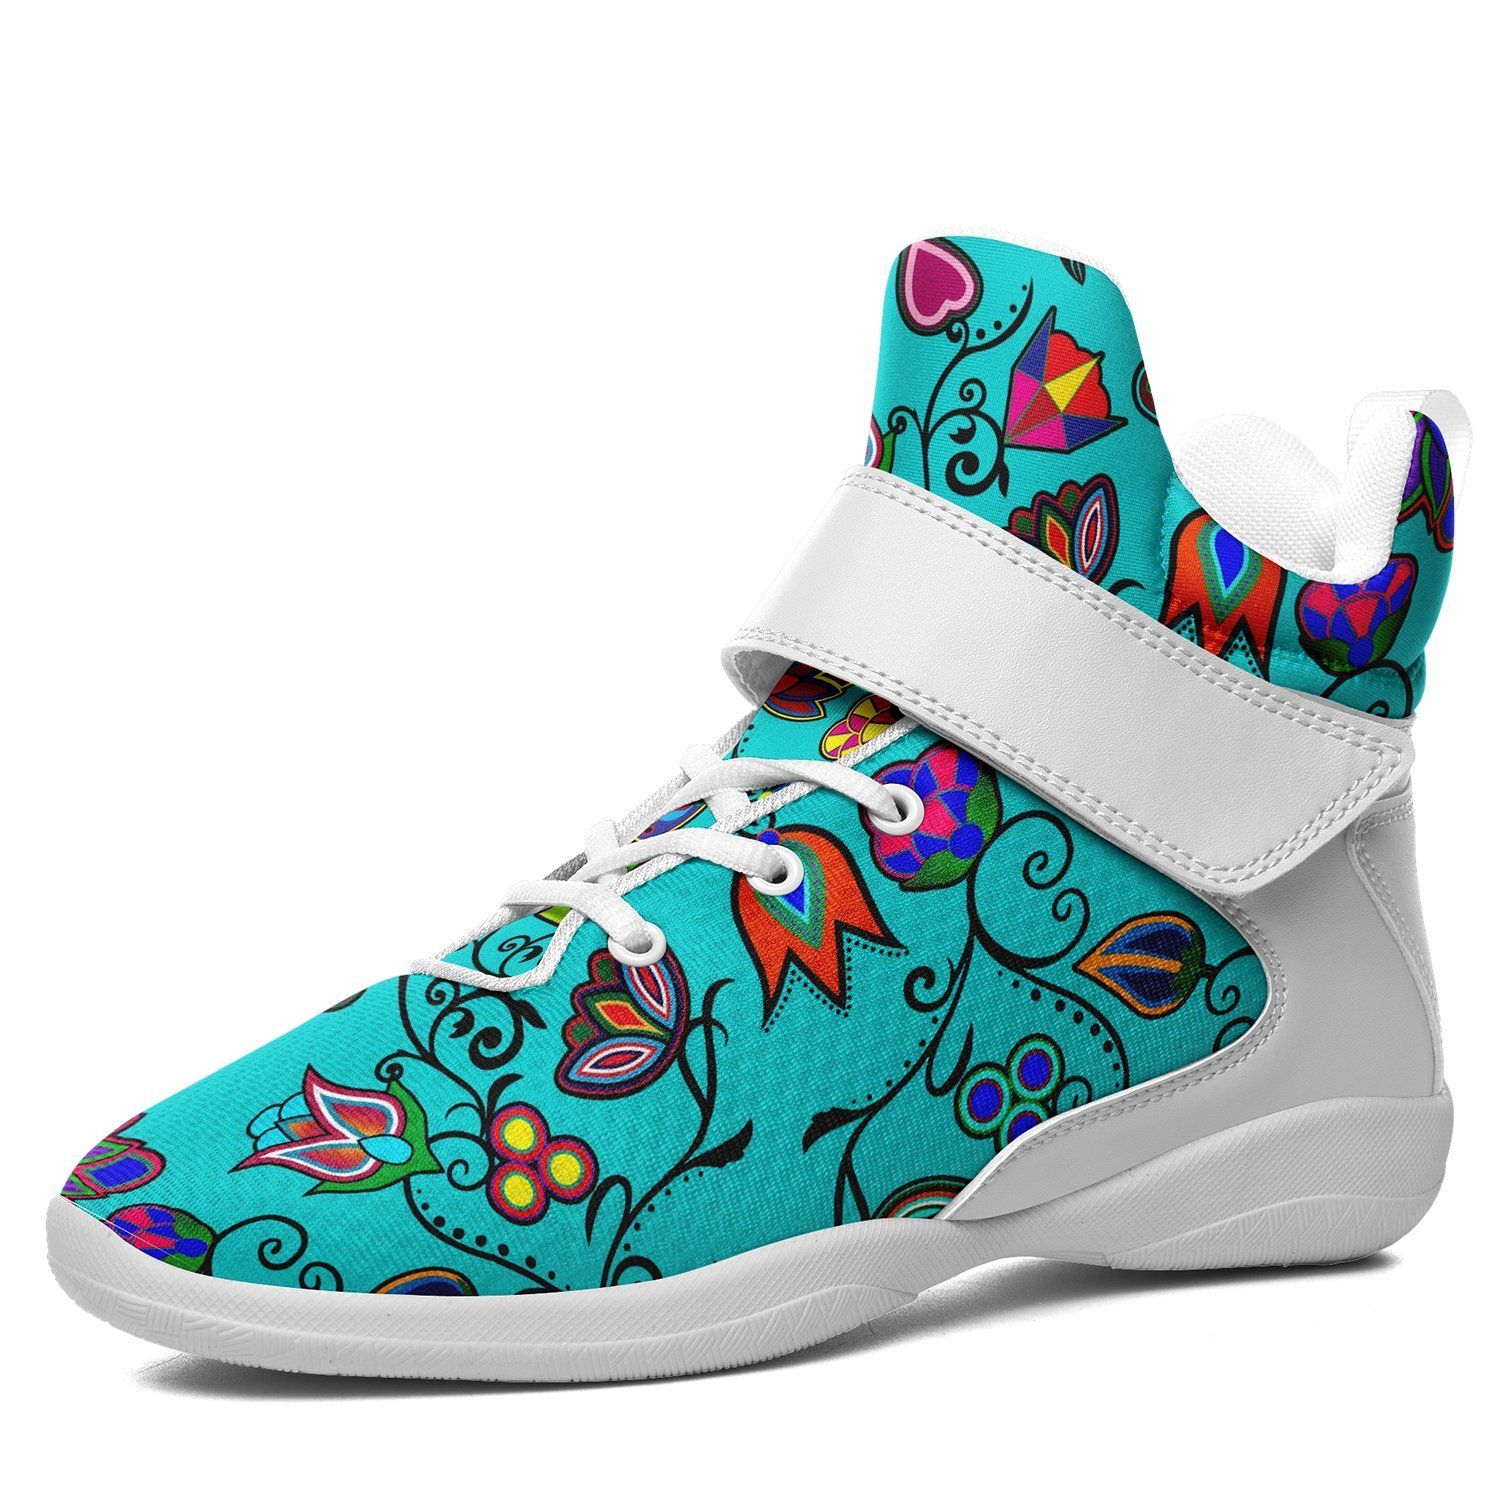 Indigenous Paisley Sky Kid's Ipottaa Basketball / Sport High Top Shoes 49 Dzine US Child 12.5 / EUR 30 White Sole with White Strap 